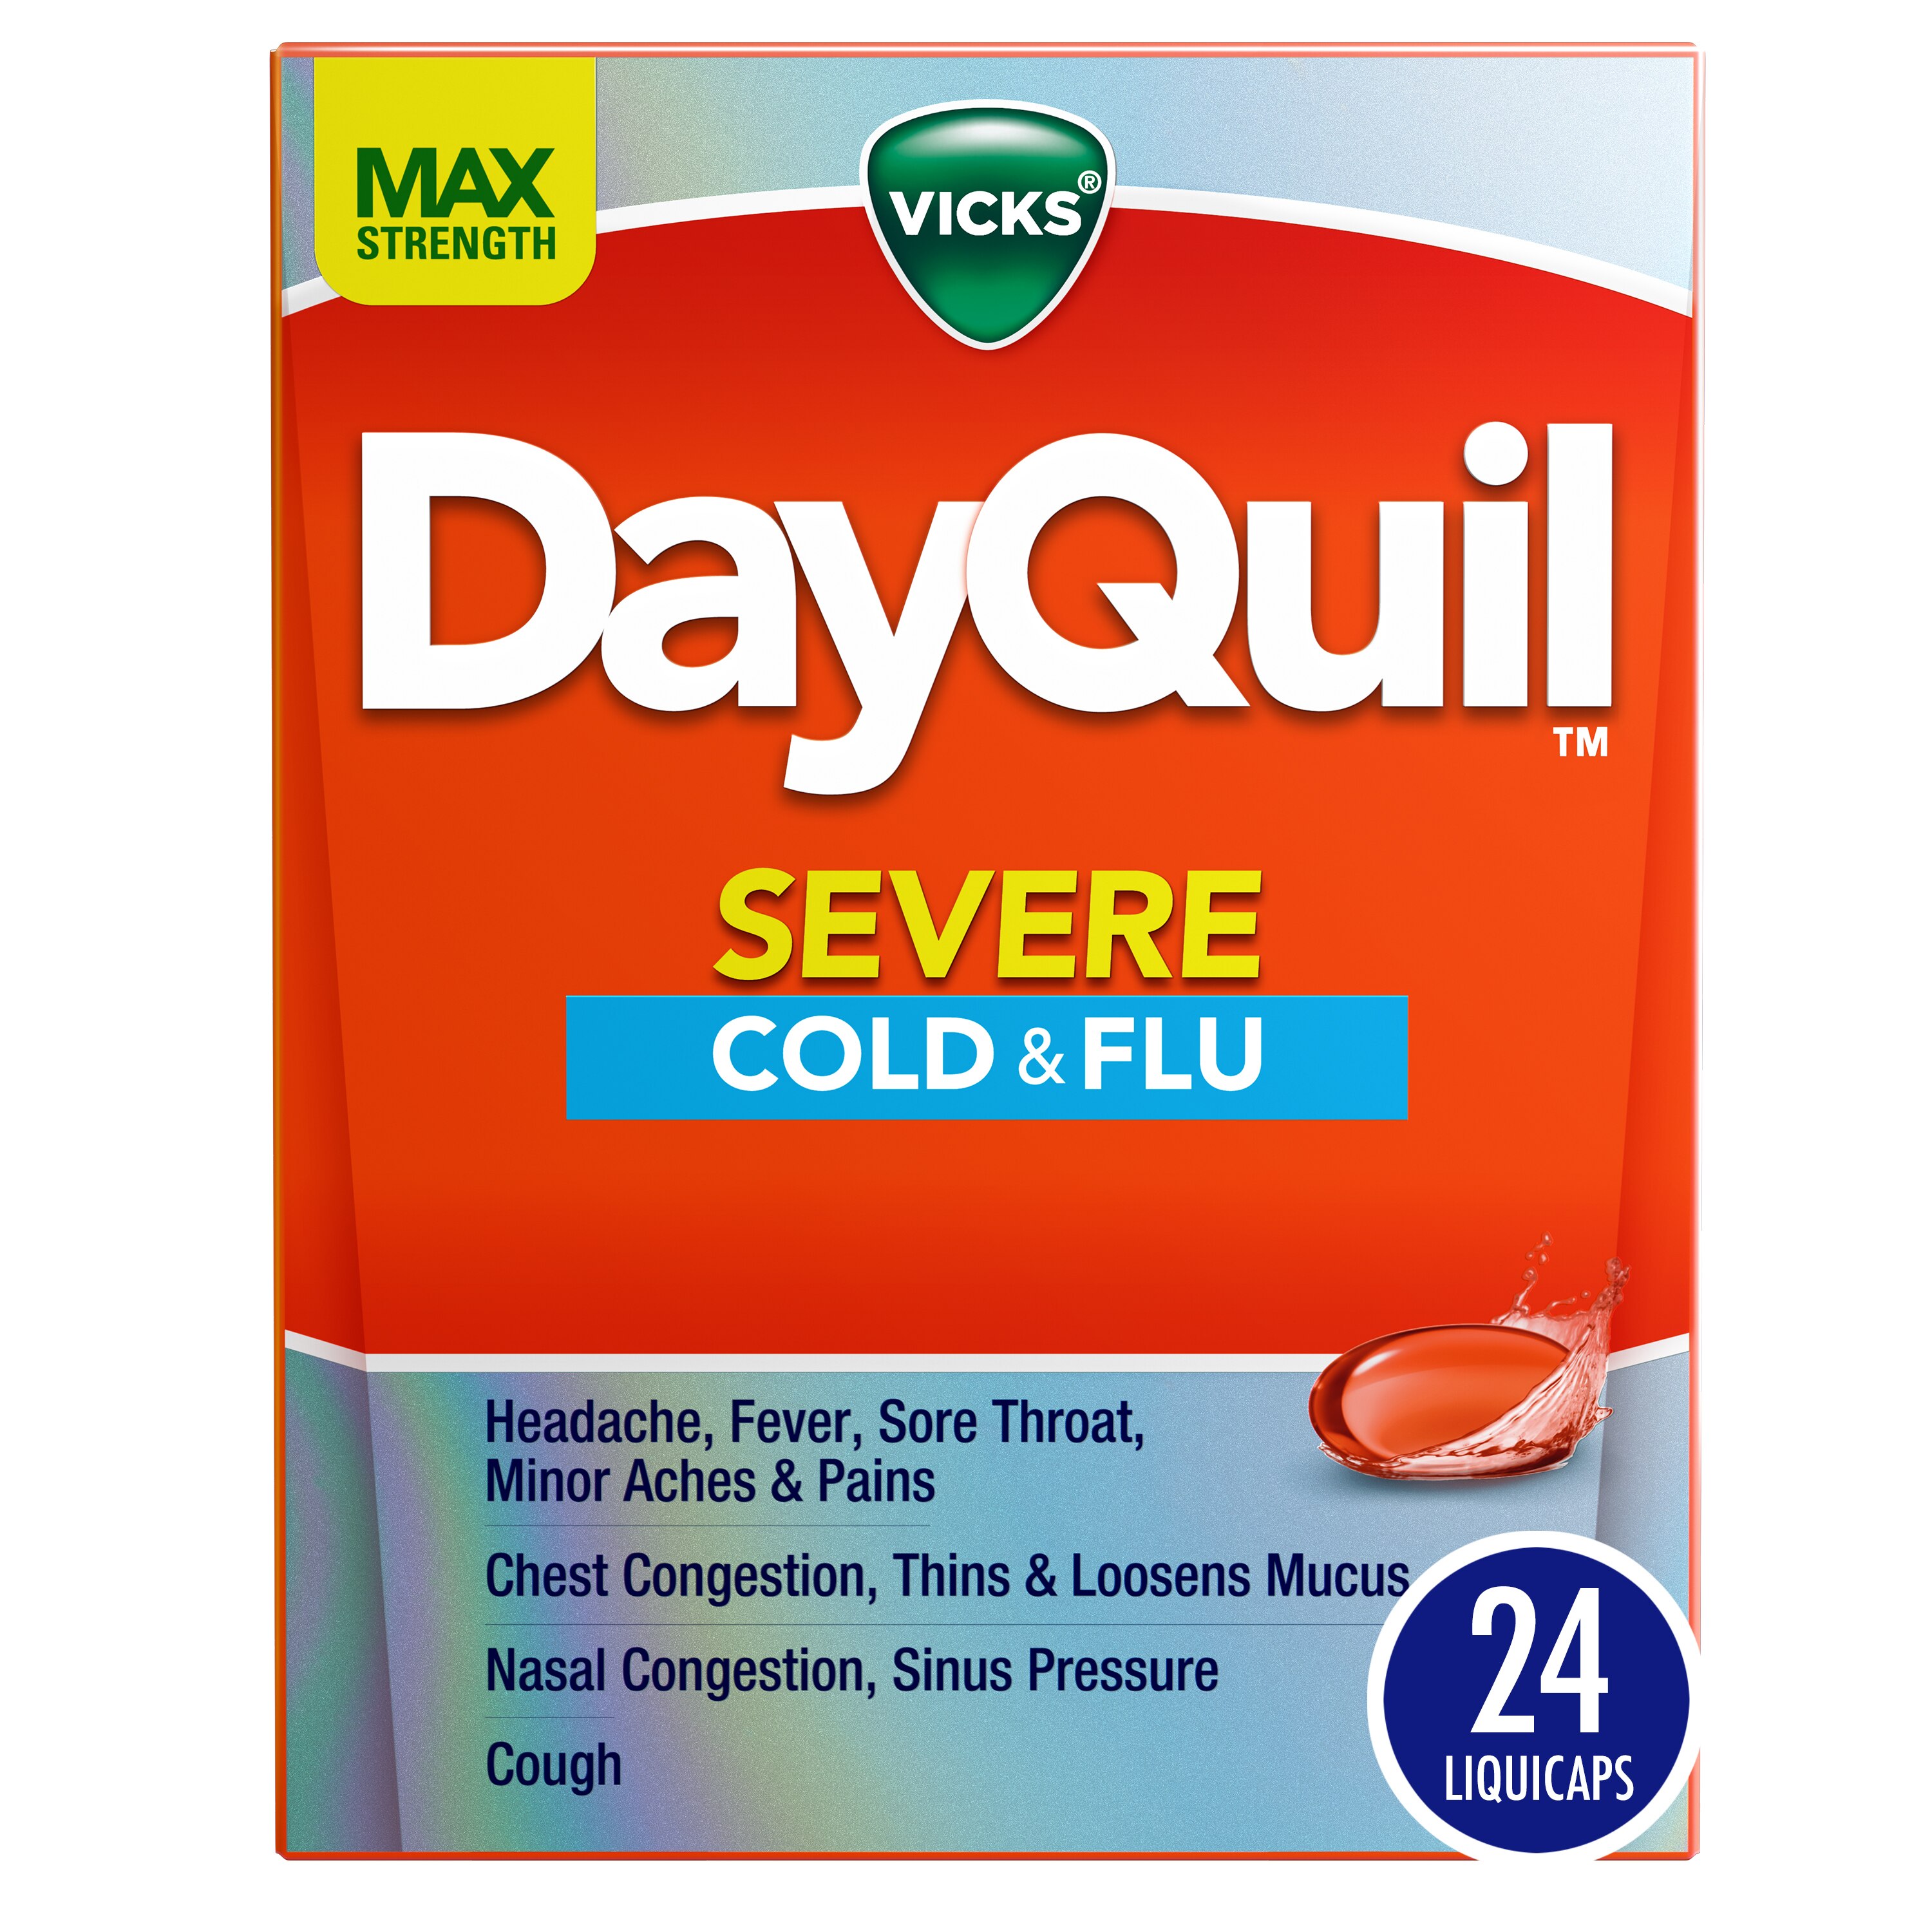 Vicks DayQuil Severe Cold, Flu and Congestion LiquiCaps, 24 CT